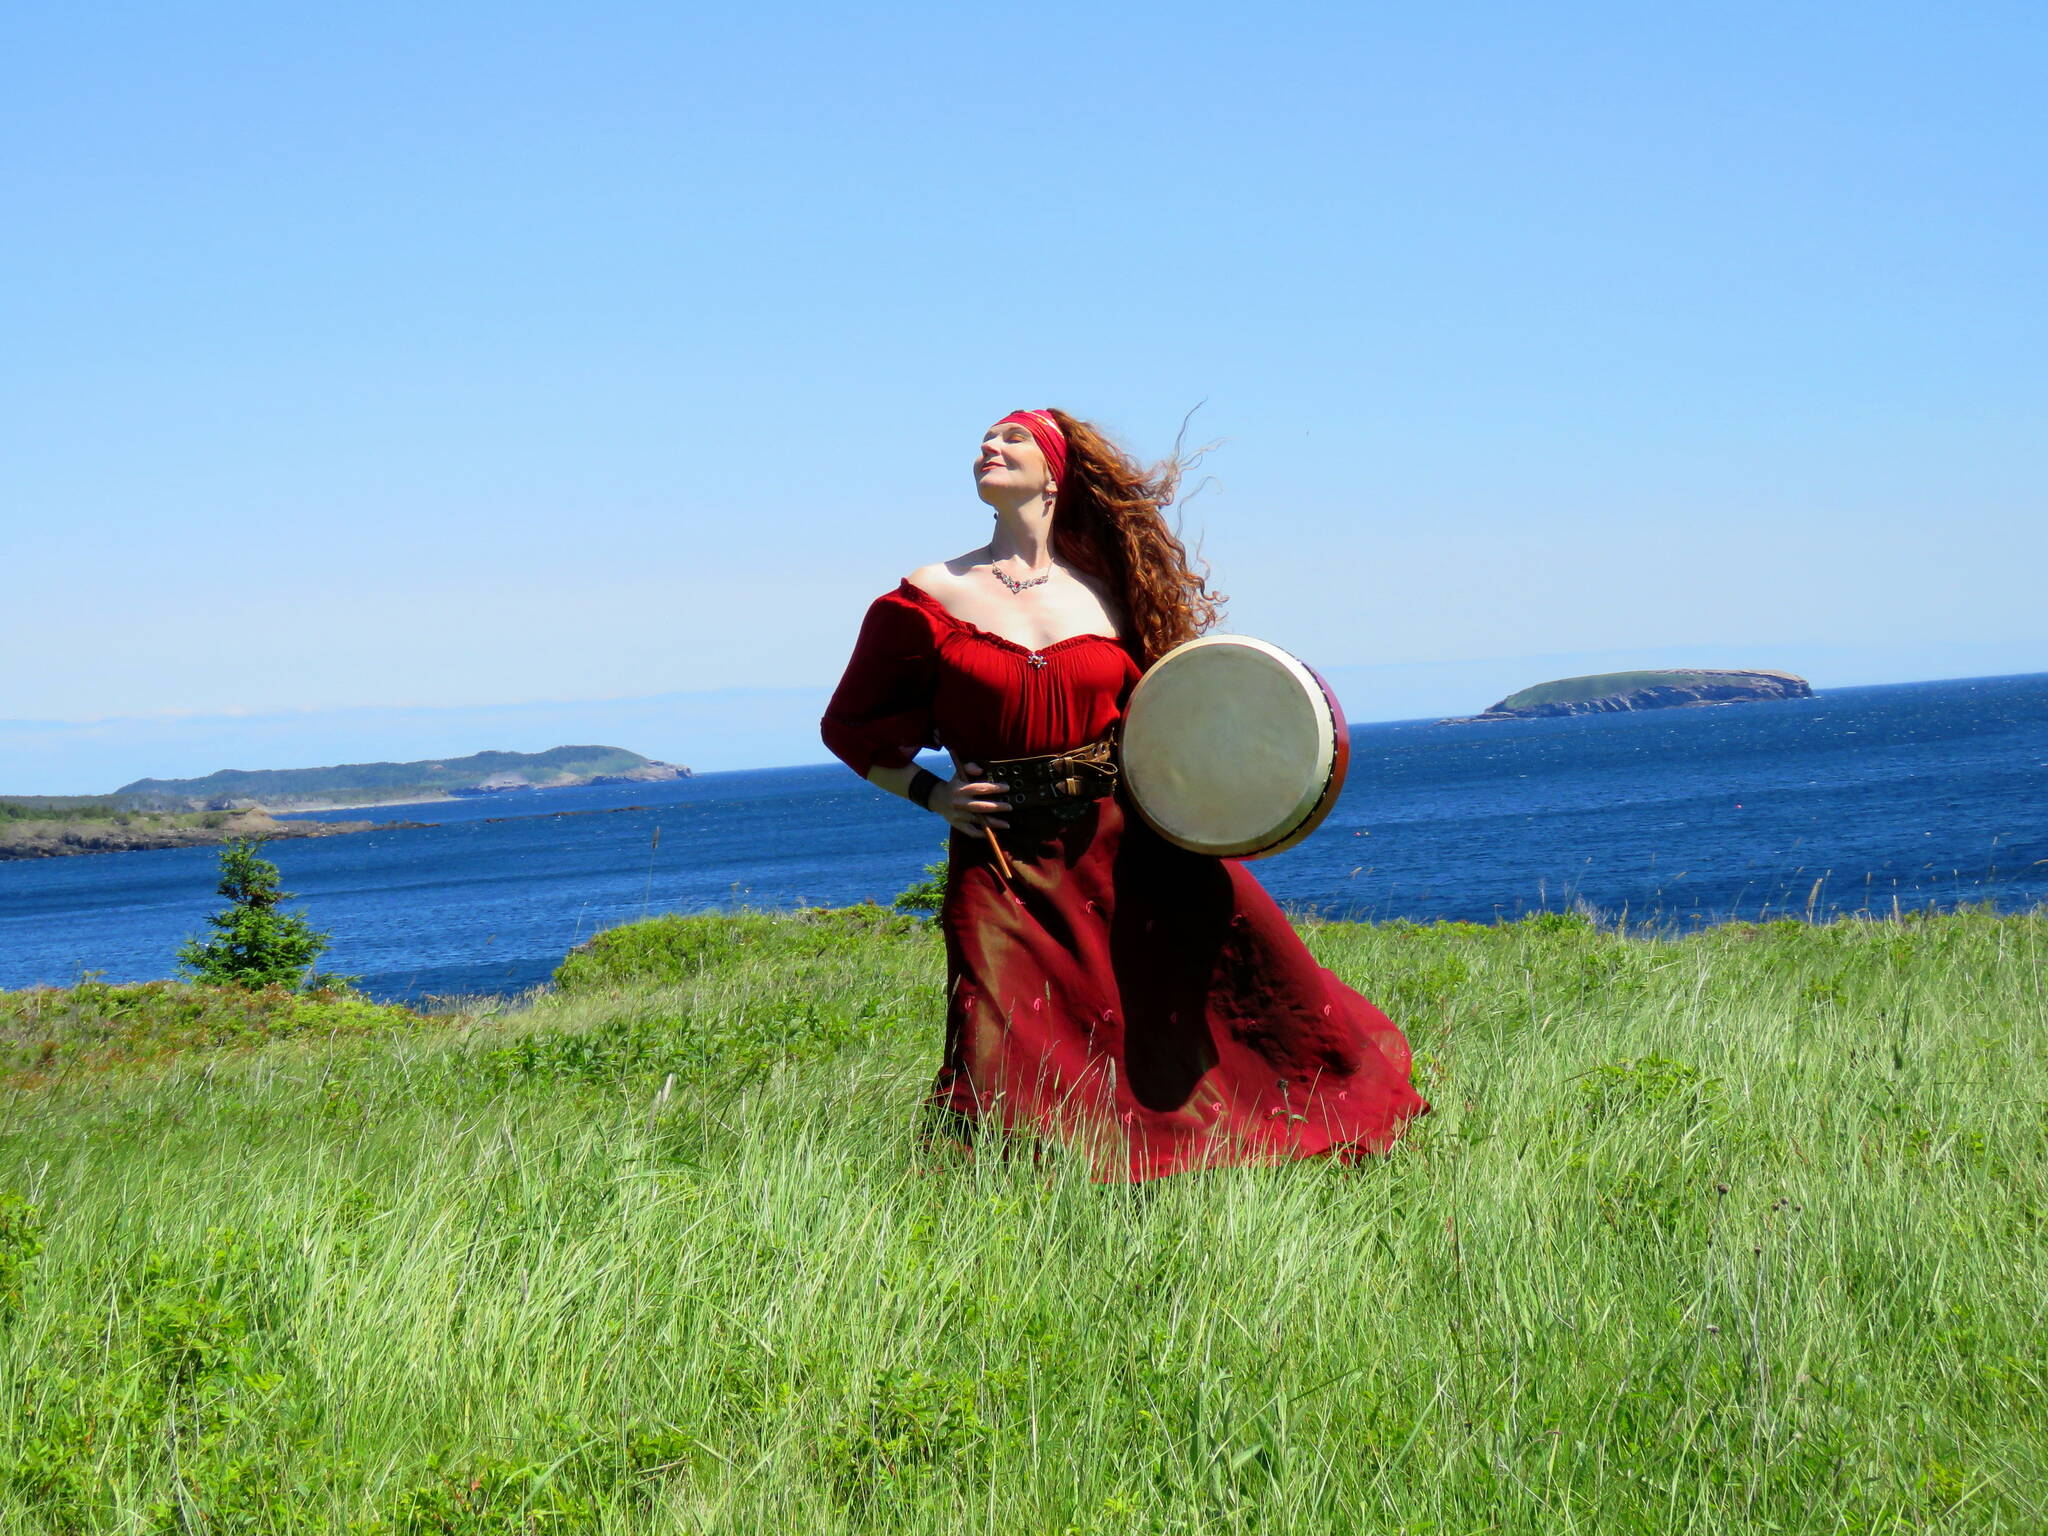 Celia Farran is a vocal artist who is relatively new to Whidbey Island. Her Earth Day performance will be filled with songs from her repertoire honoring earth, water and the elements. (Photo provided)